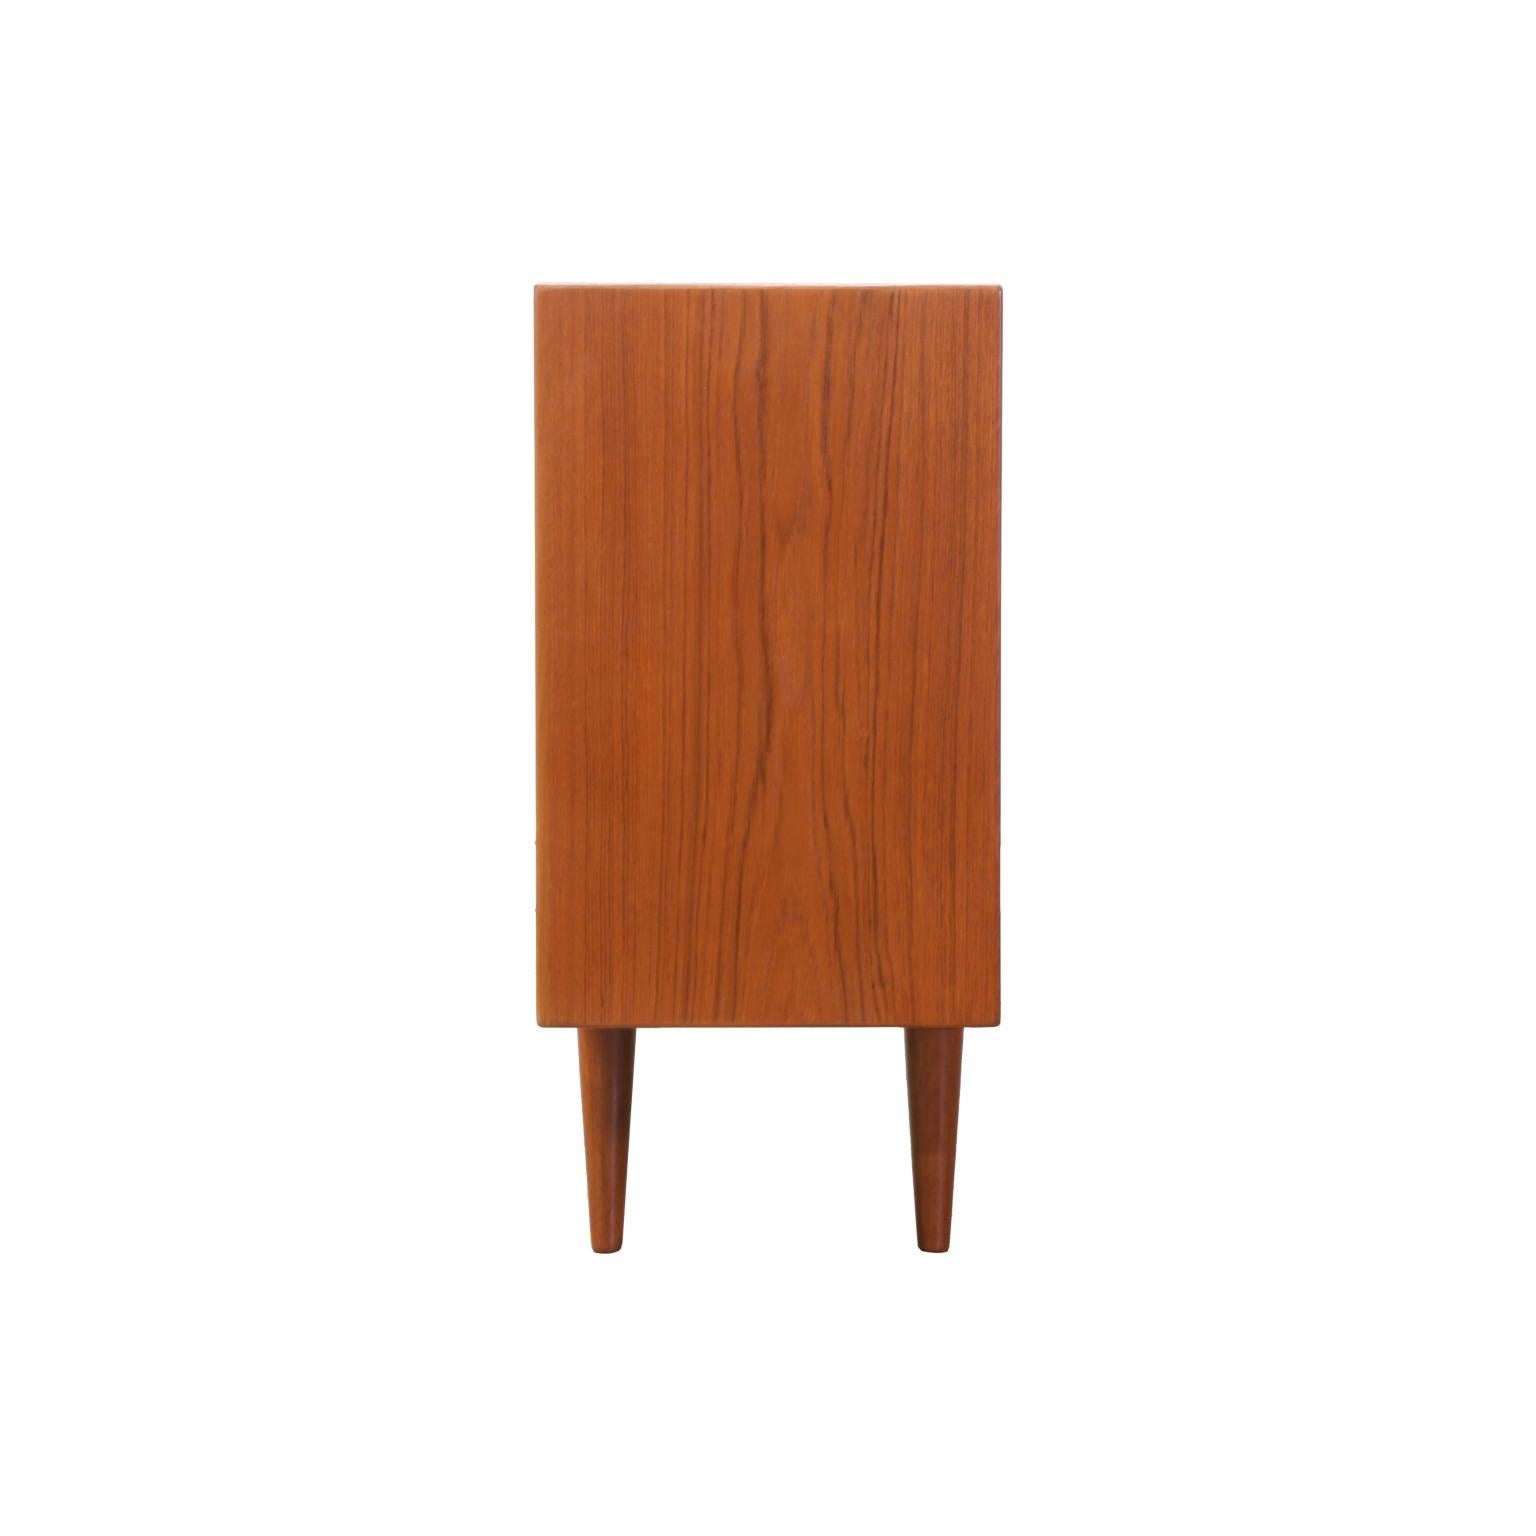 Designer: Unknown
Manufacturer: Unknown
Period/Style: Danish Modern
Country: Denmark
Date: 1960’s

Dimensions: 28″H x 83″L x 12.5″W
Materials: Teak, Glass
Condition: Excellent – Newly Refinished
Number of Items: 1
ID Number: PENDING